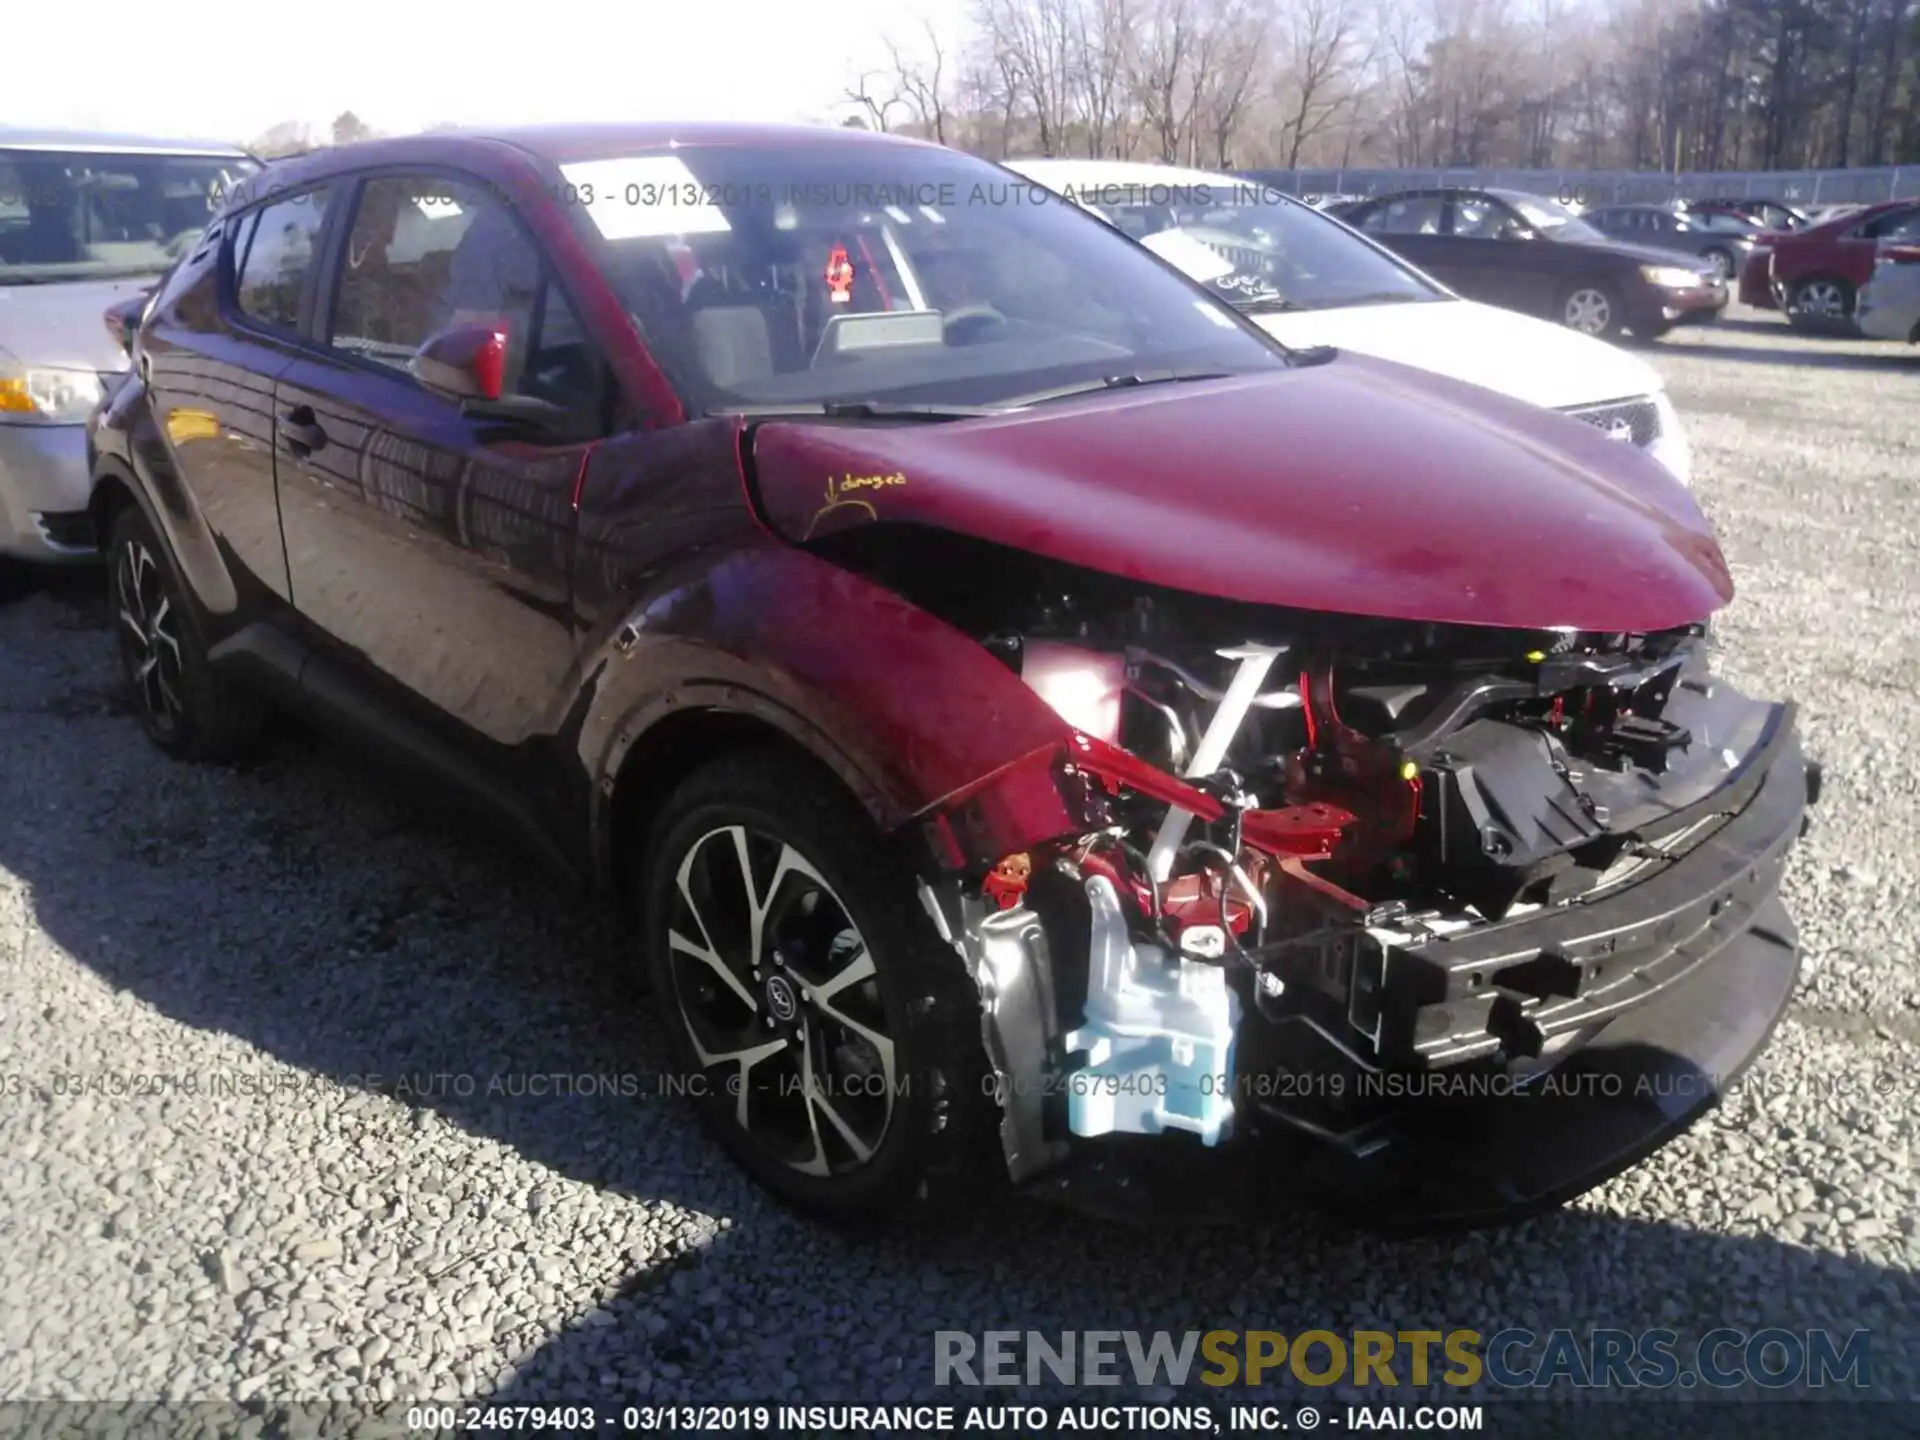 1 Photograph of a damaged car NMTKHMBXXKR081980 TOYOTA C-HR 2019